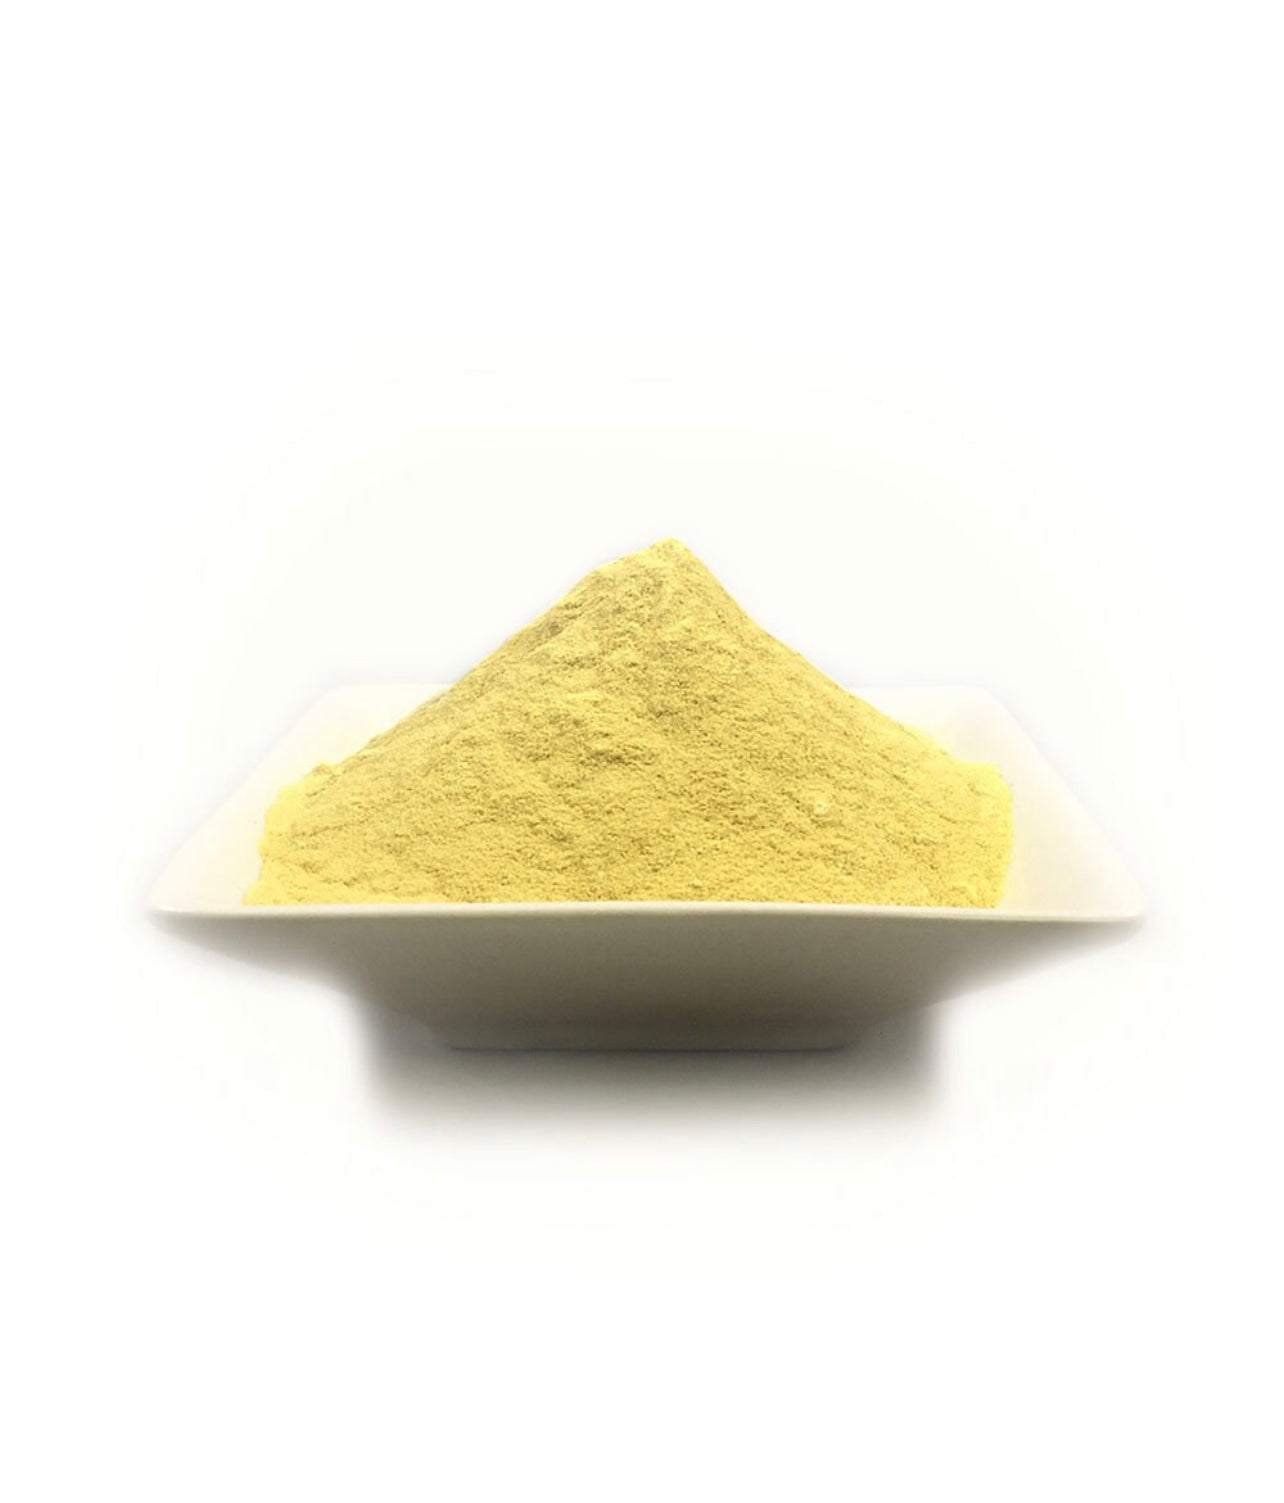 Kava Extract 70% with 30% Kavalactones